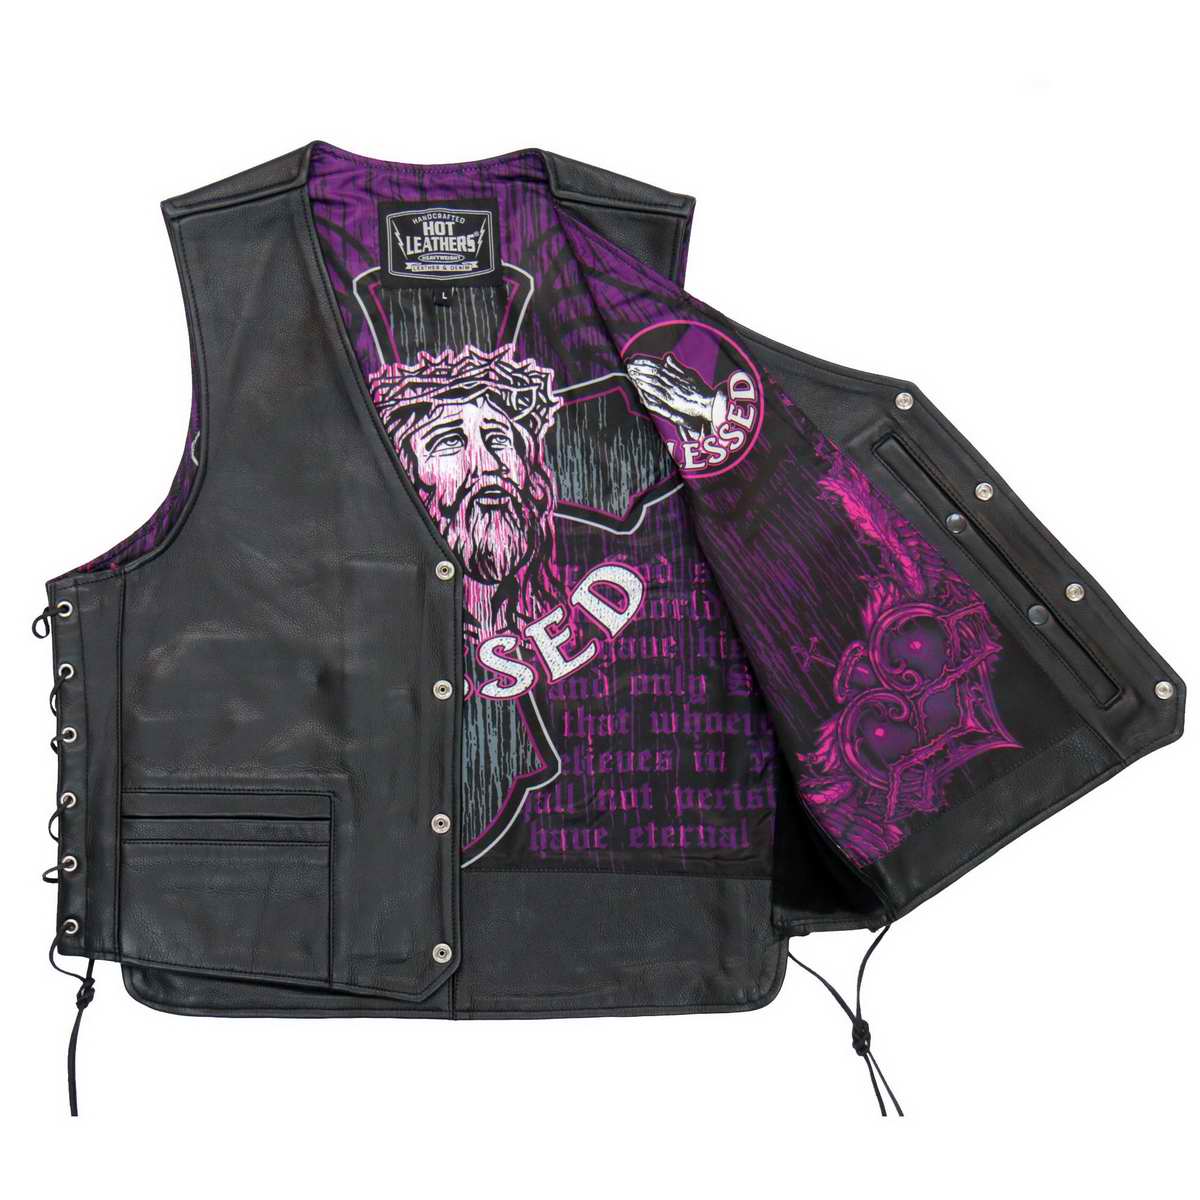 Hot Leathers VSM1063 Men's Black 'Blessed' Conceal and Carry Side Lace Leather Vest